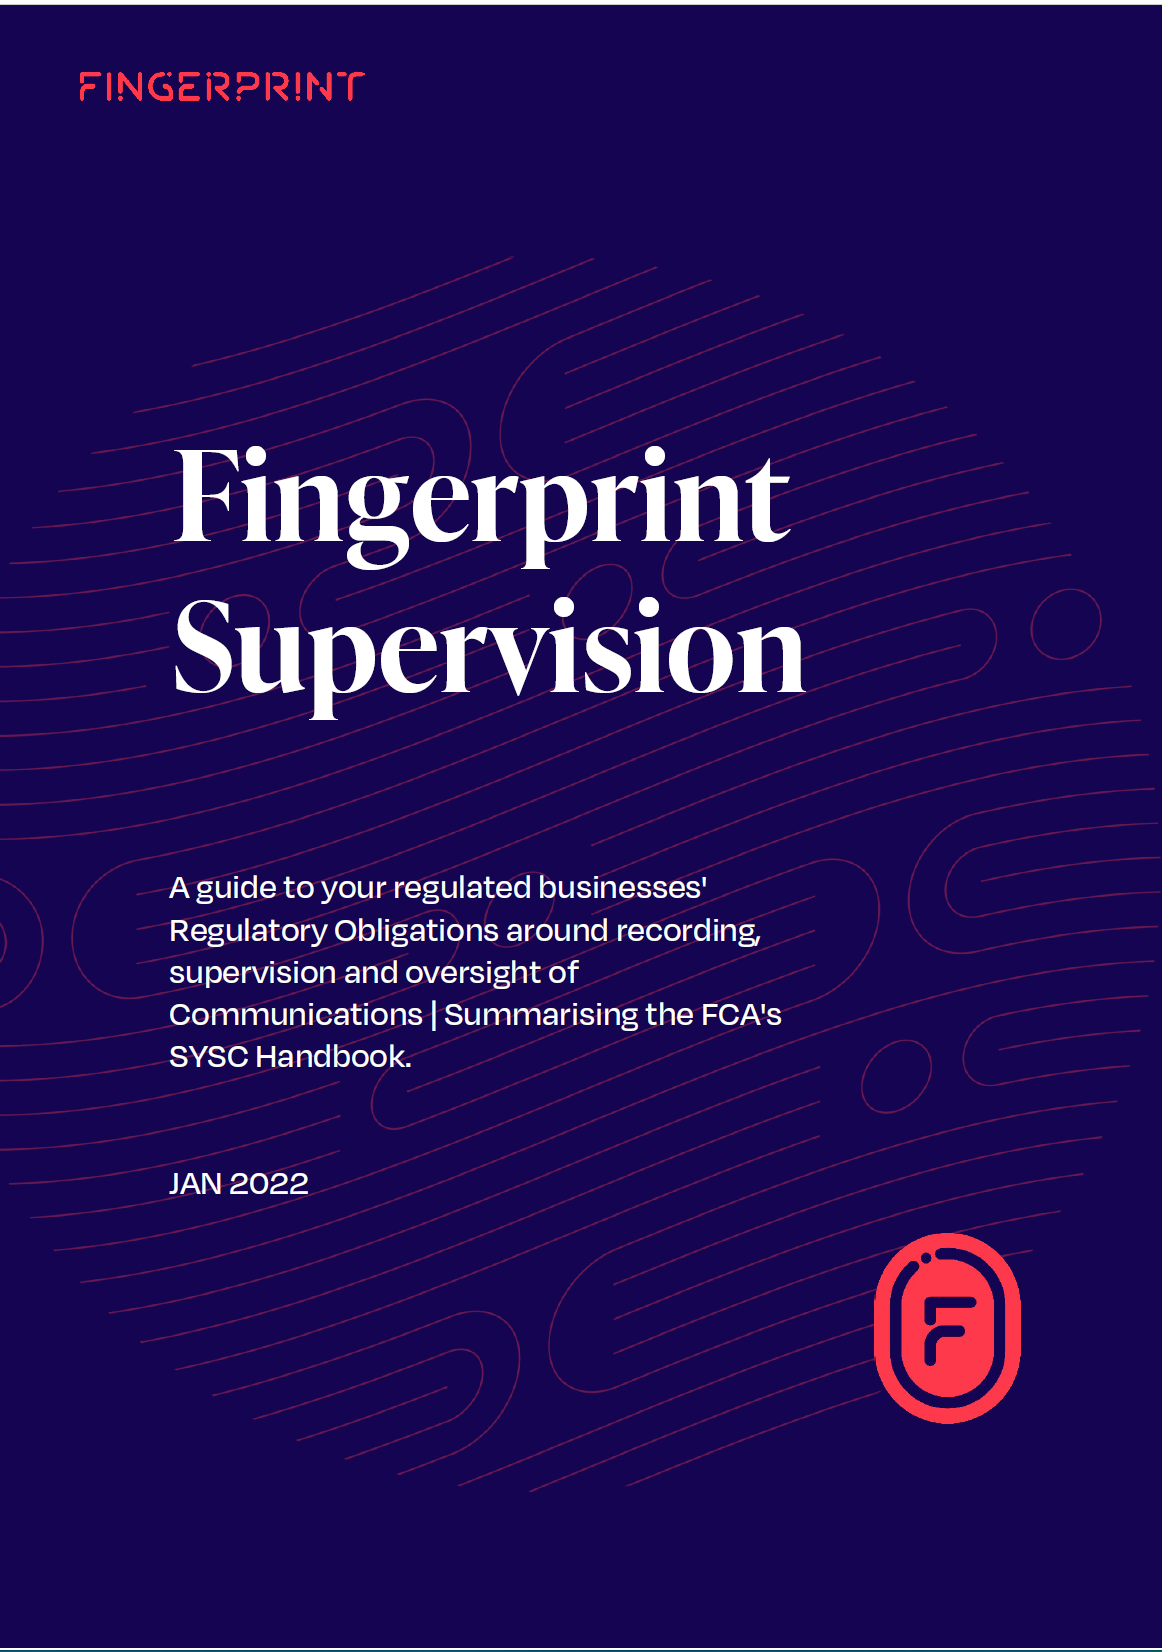 Fingerprint Guide | FCA requirements for comms supervision and oversight.